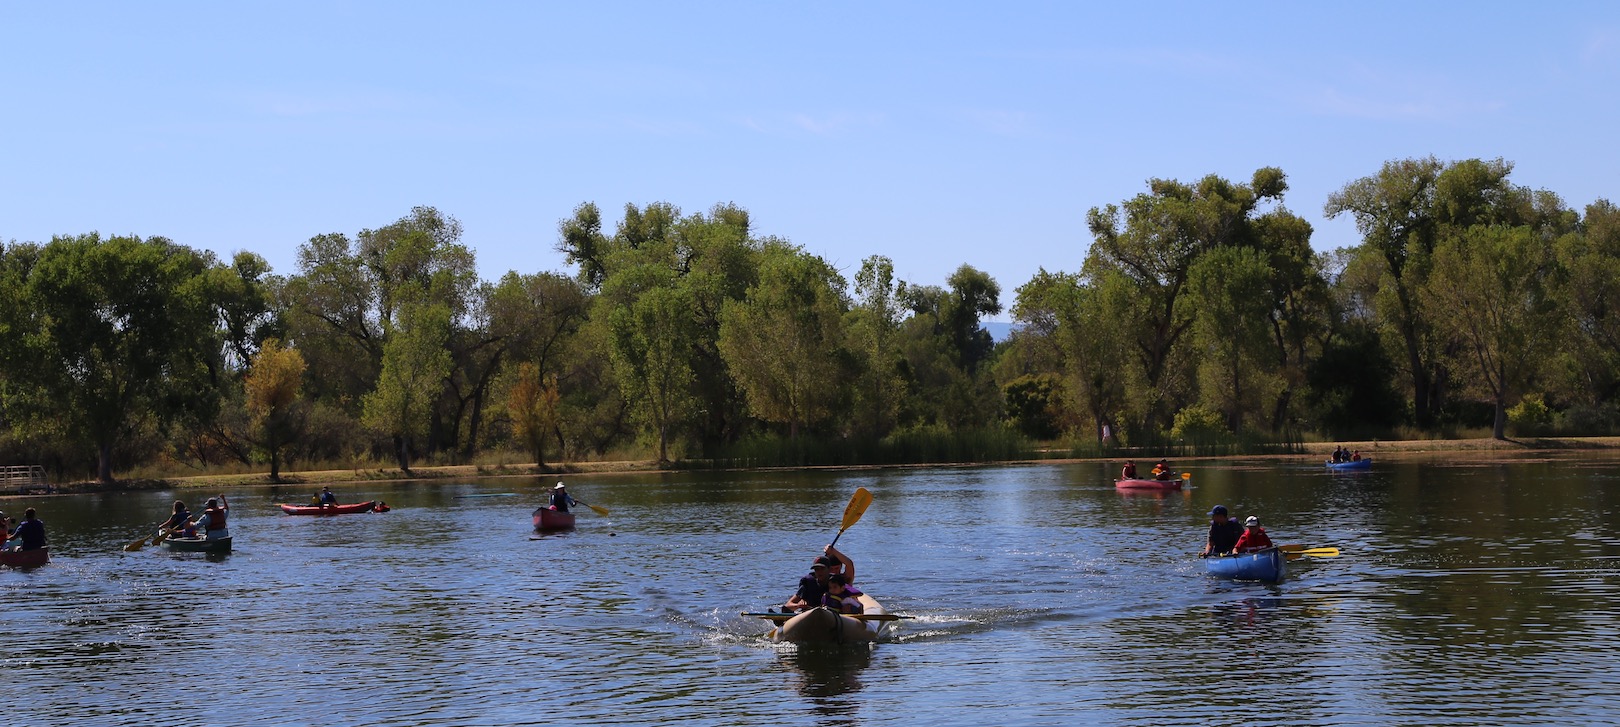 Kayakers on the water at Dead Horse Ranch